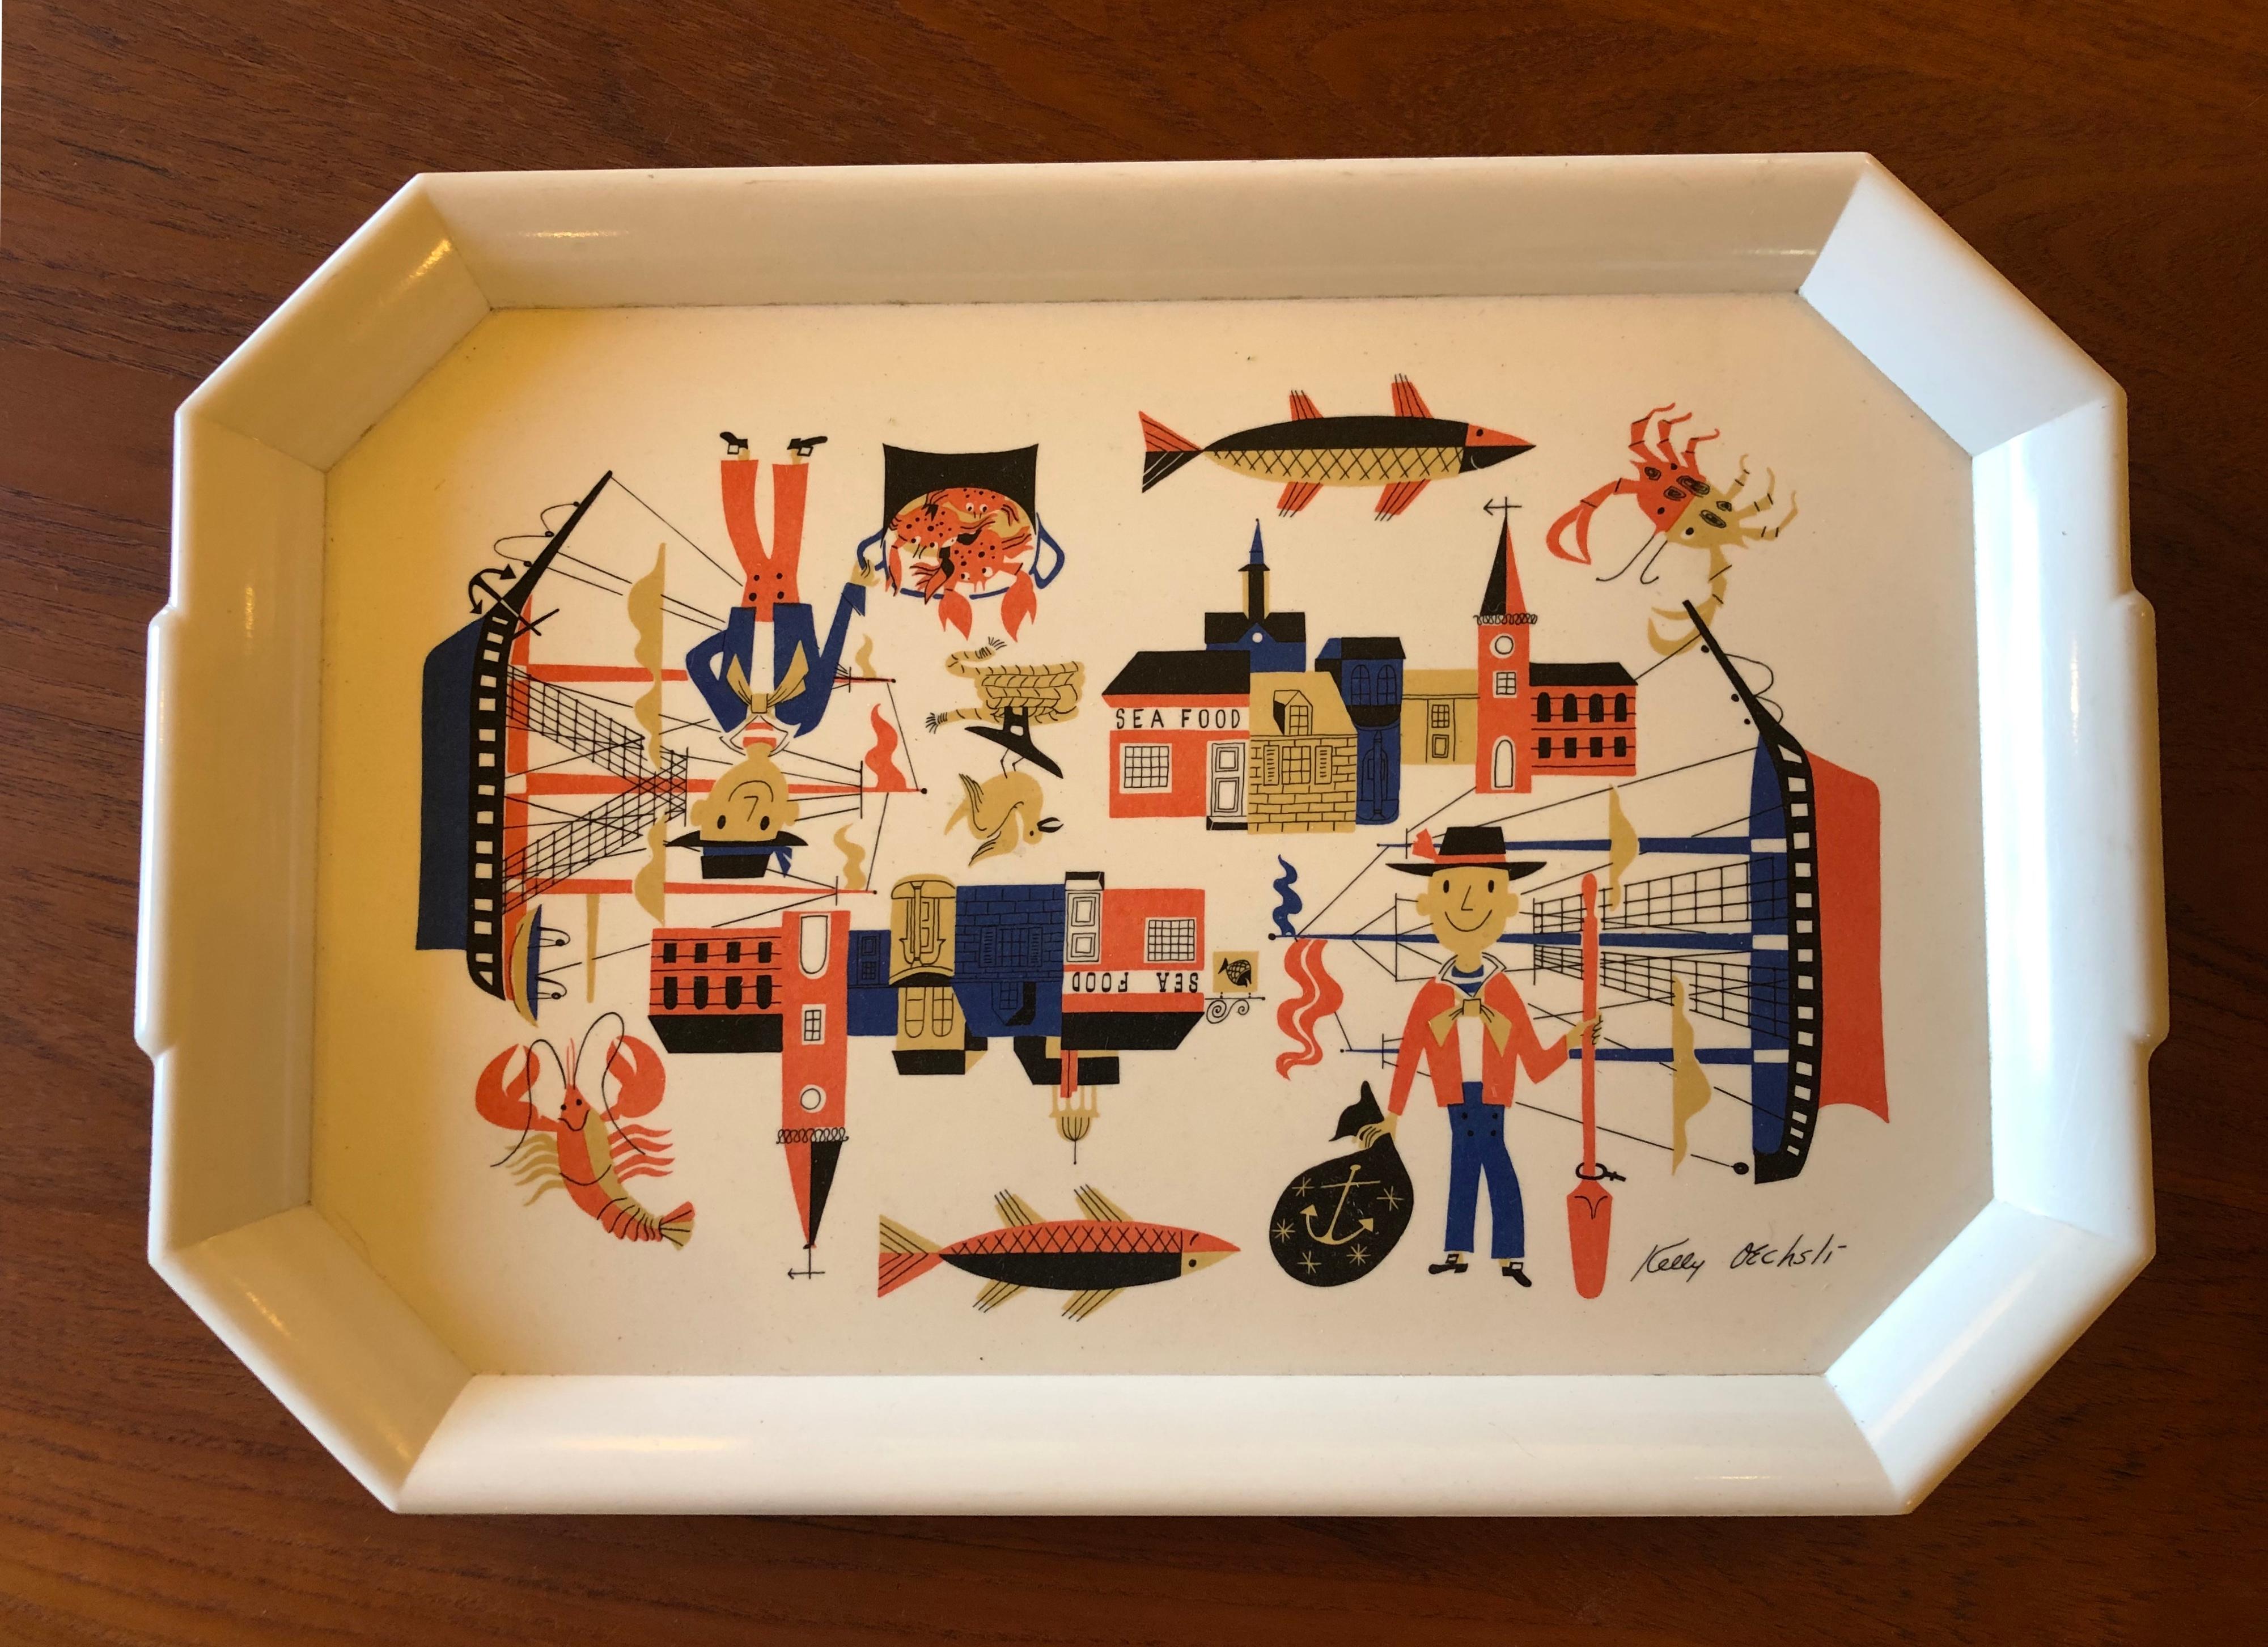 Whimsical and rare tray in melamine by Kelly Oechsli for Waverly Products circa 1970s. Great condition and design.